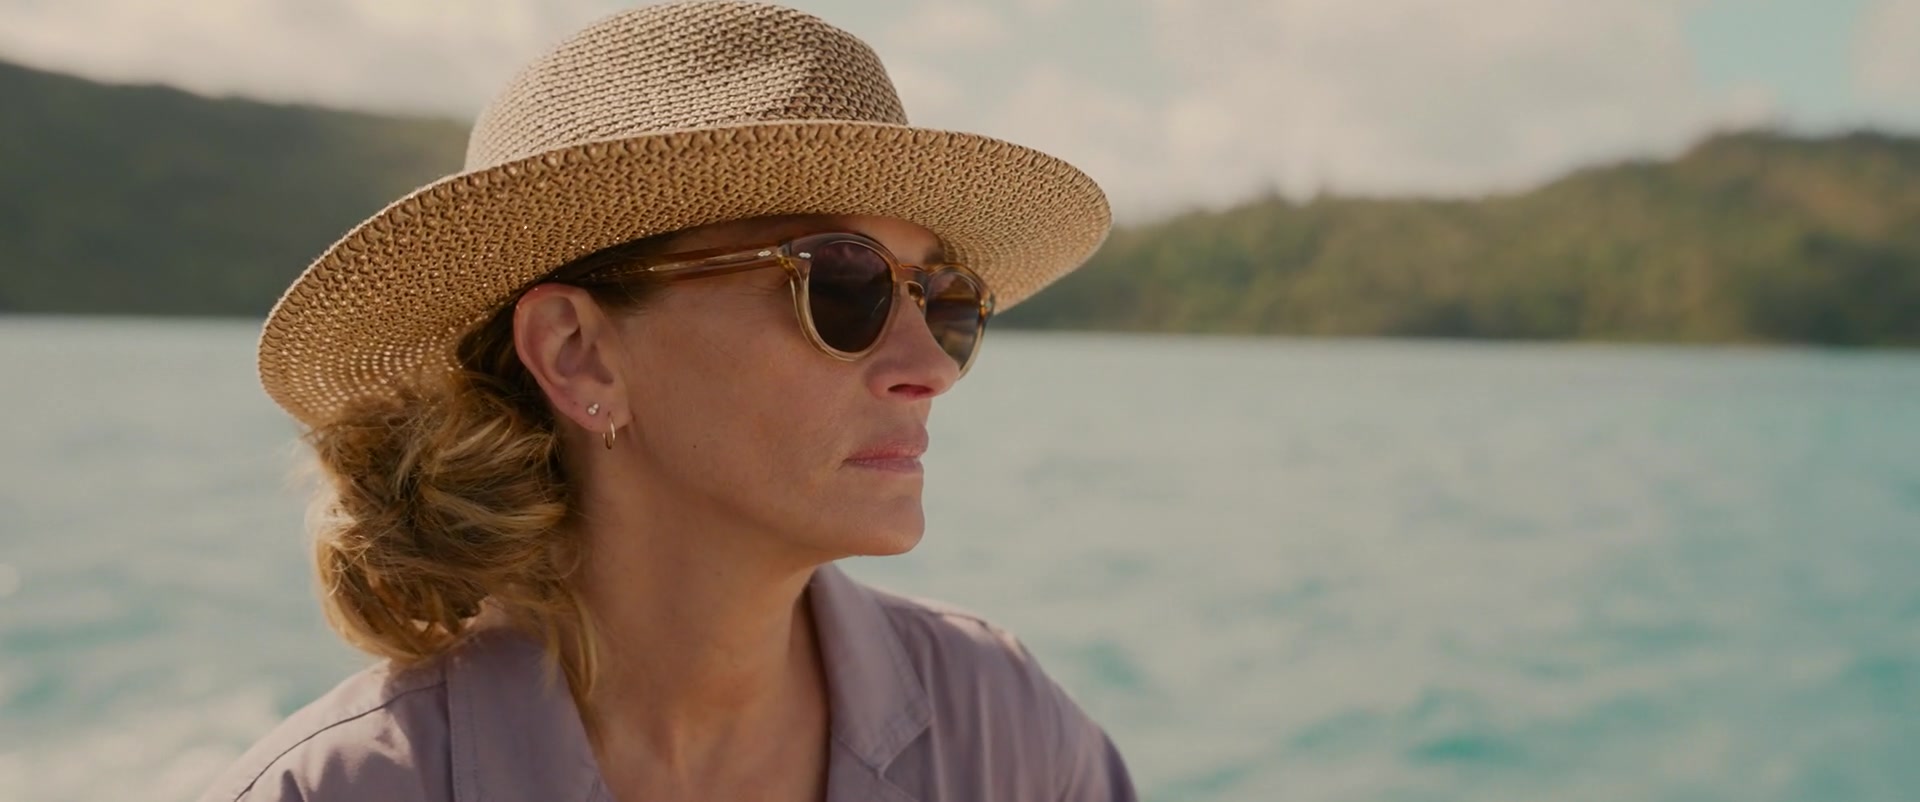 Oliver Peoples Women's Sunglasses Of Julia Roberts As Georgia Cotton In  Ticket To Paradise (2022)